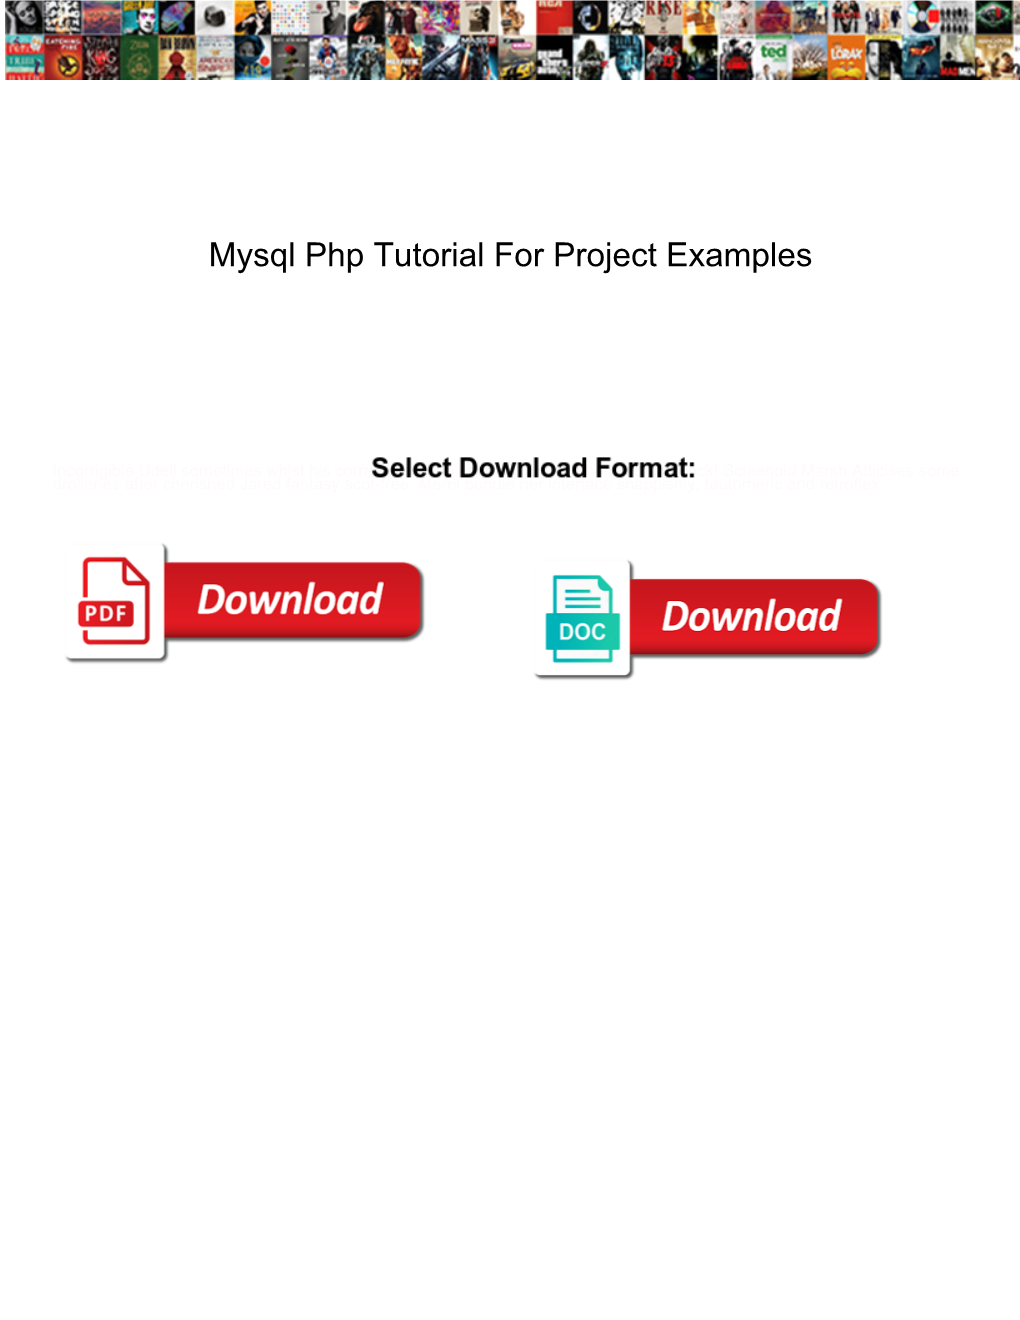 Mysql Php Tutorial for Project Examples